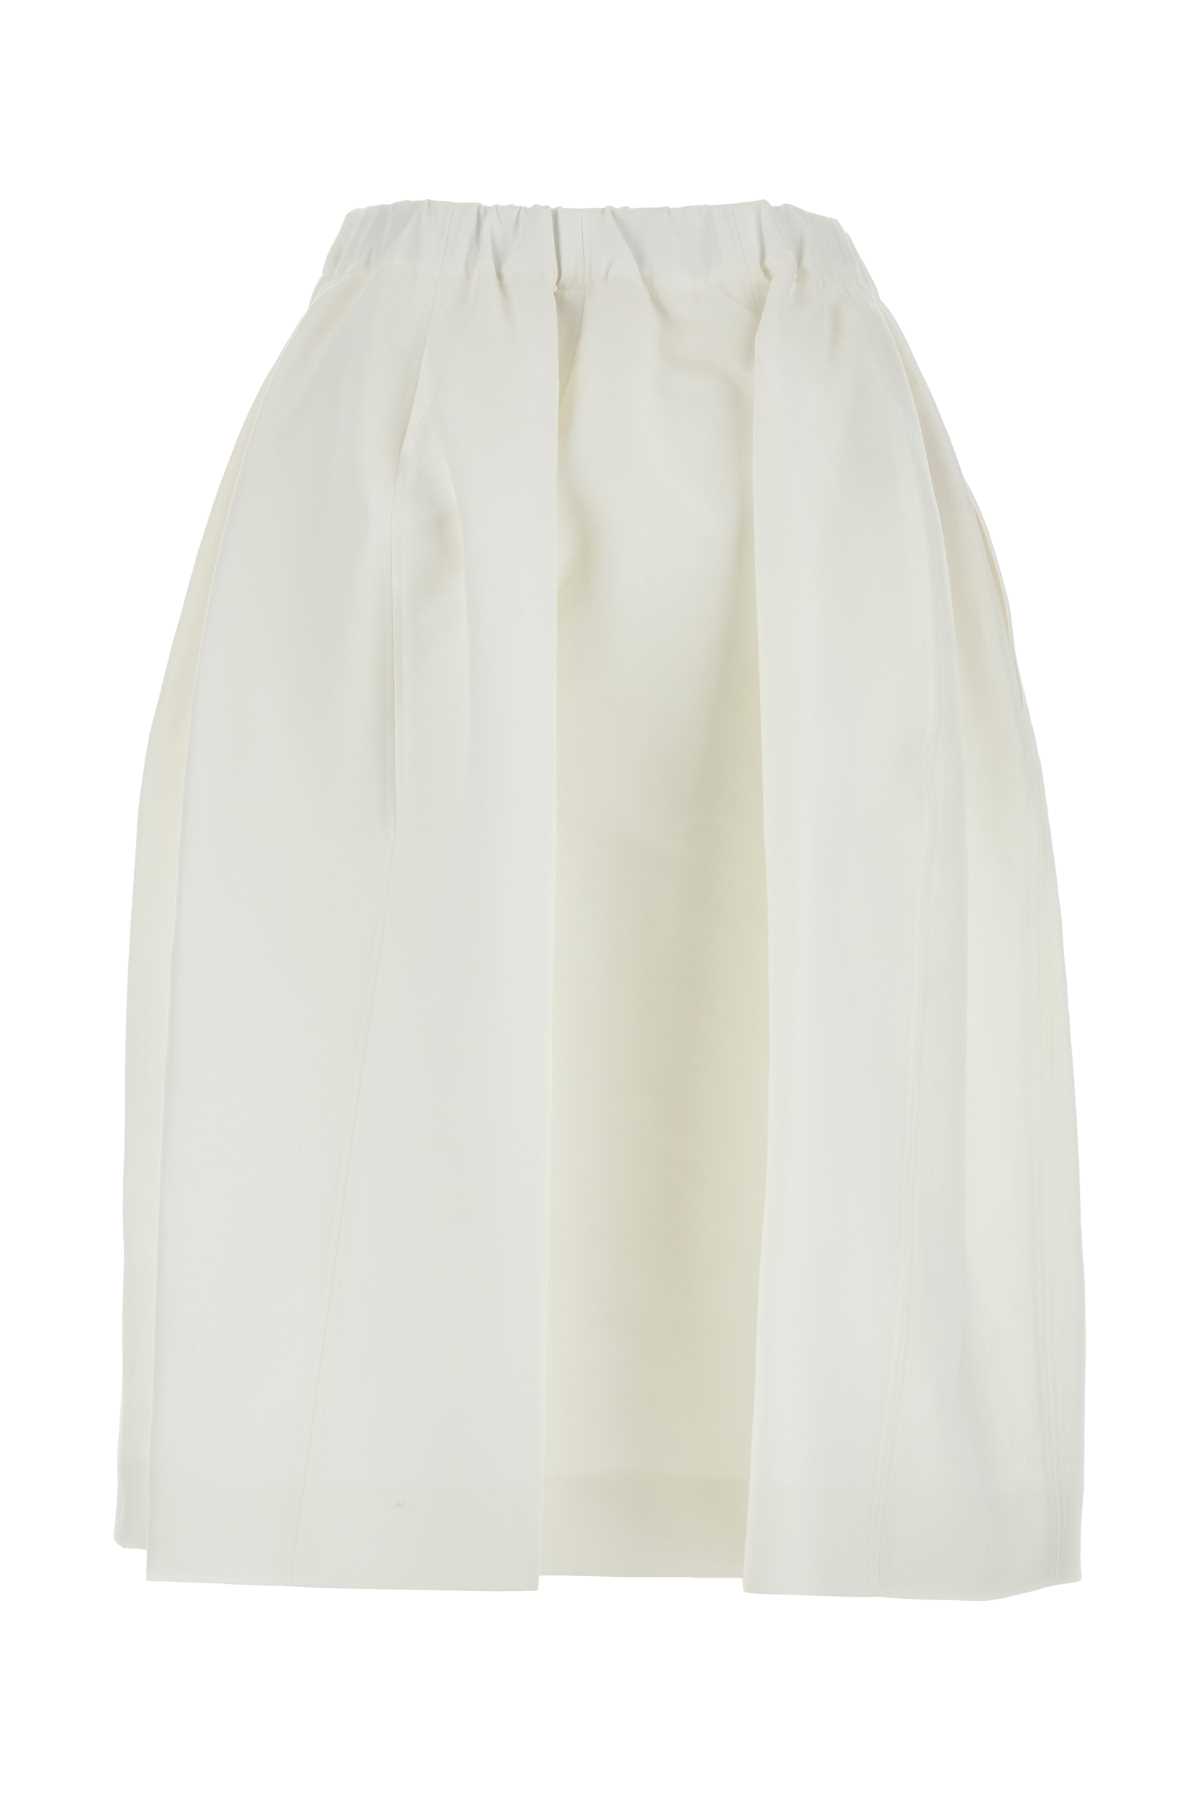 Marni White Cady Skirt In 00w01